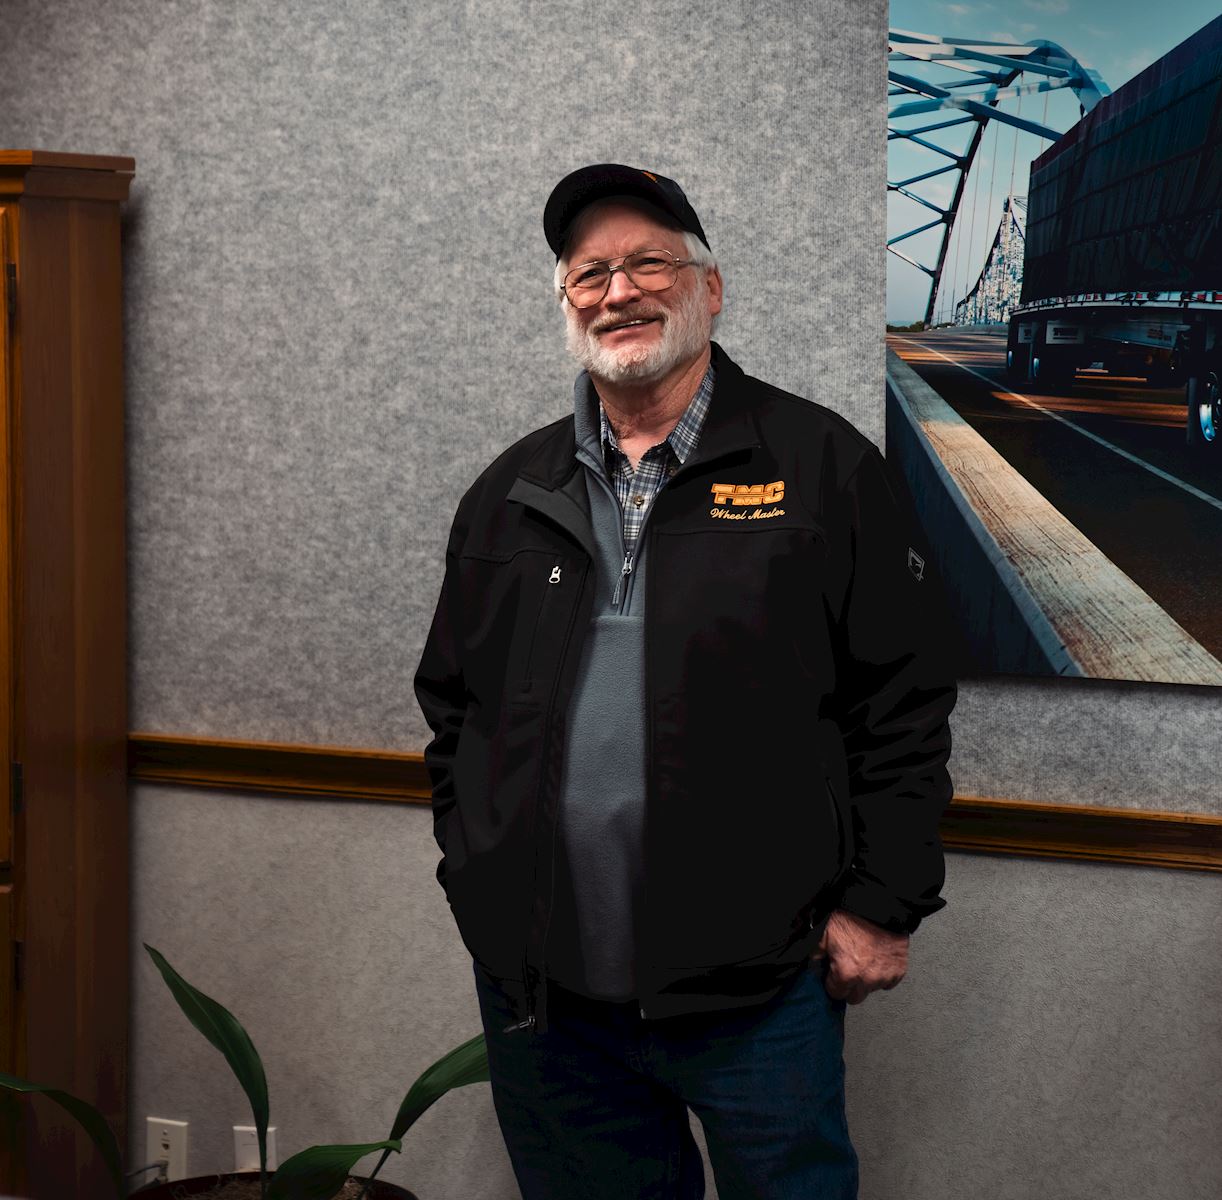 Wheel Master Les Bohlken Retires After 37 Years Driving for TMC